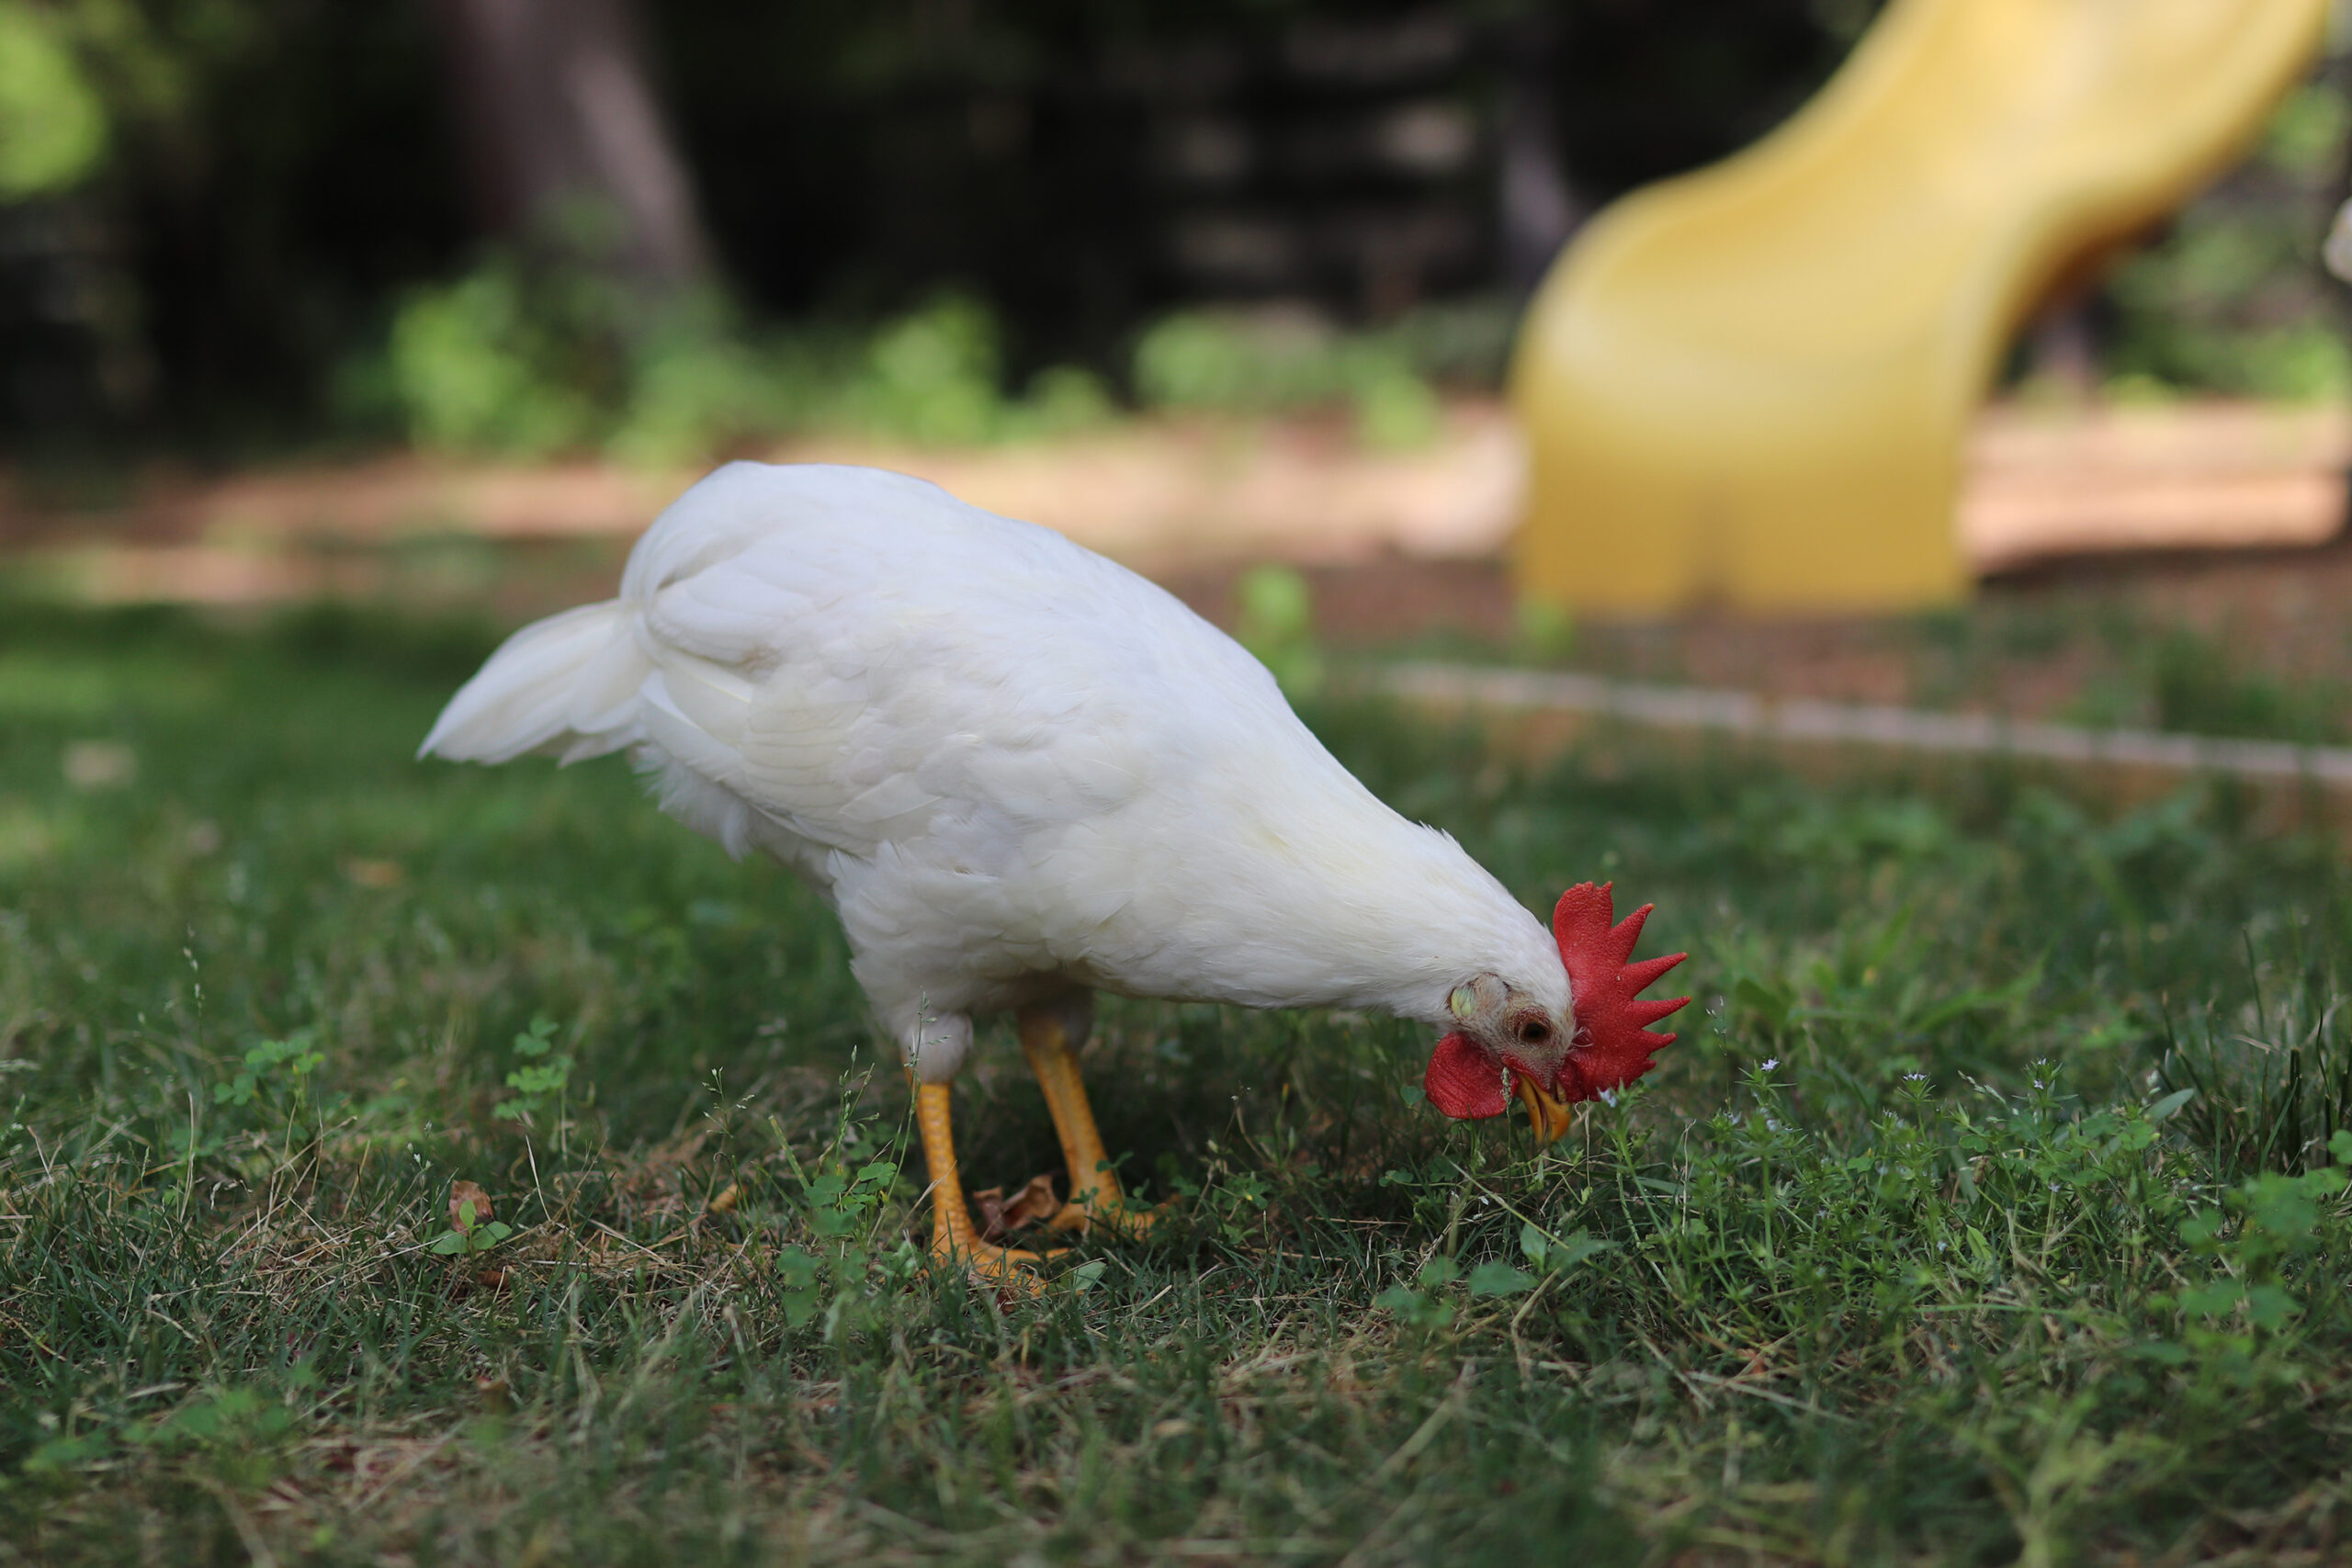 Our white Leghorn hen that turned out to be a rooster